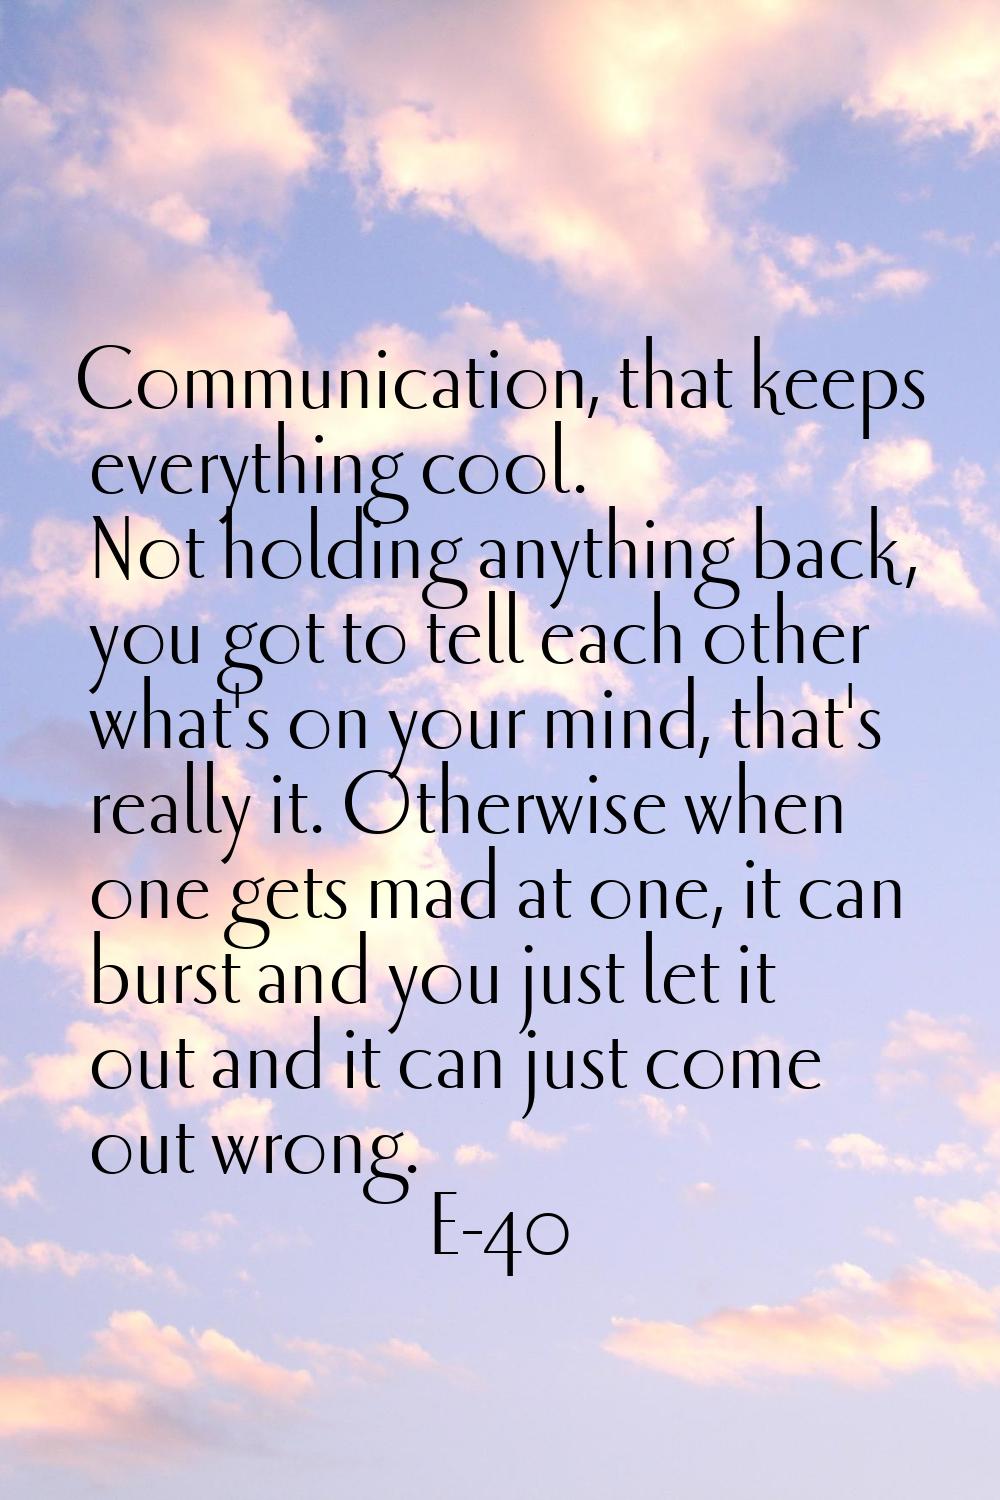 Communication, that keeps everything cool. Not holding anything back, you got to tell each other wh